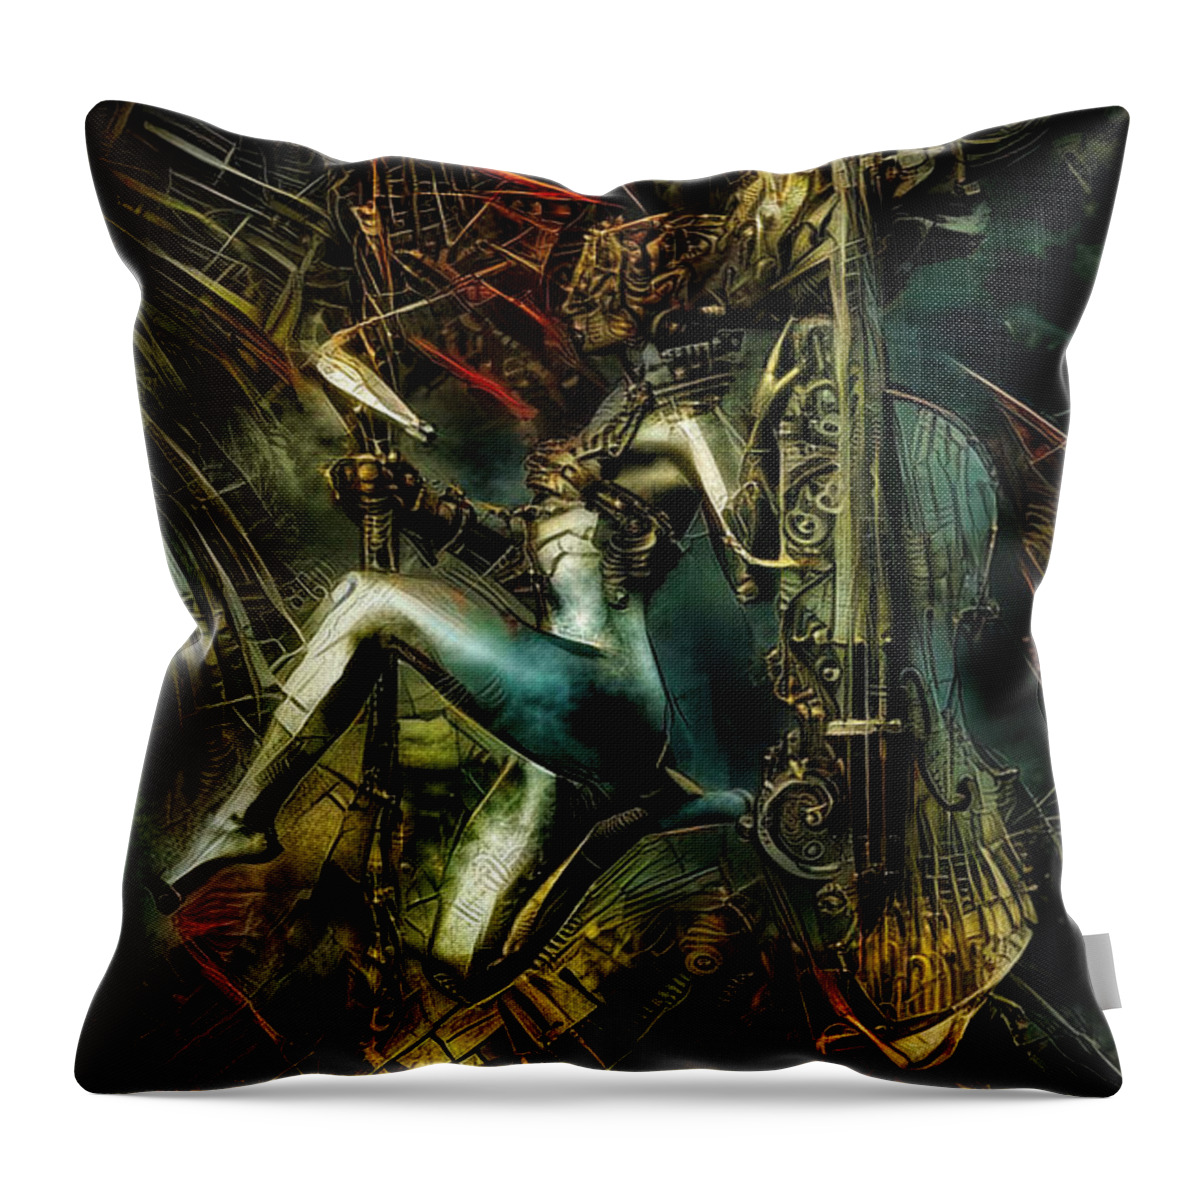 Musician Throw Pillow featuring the mixed media Musician by Lilia D